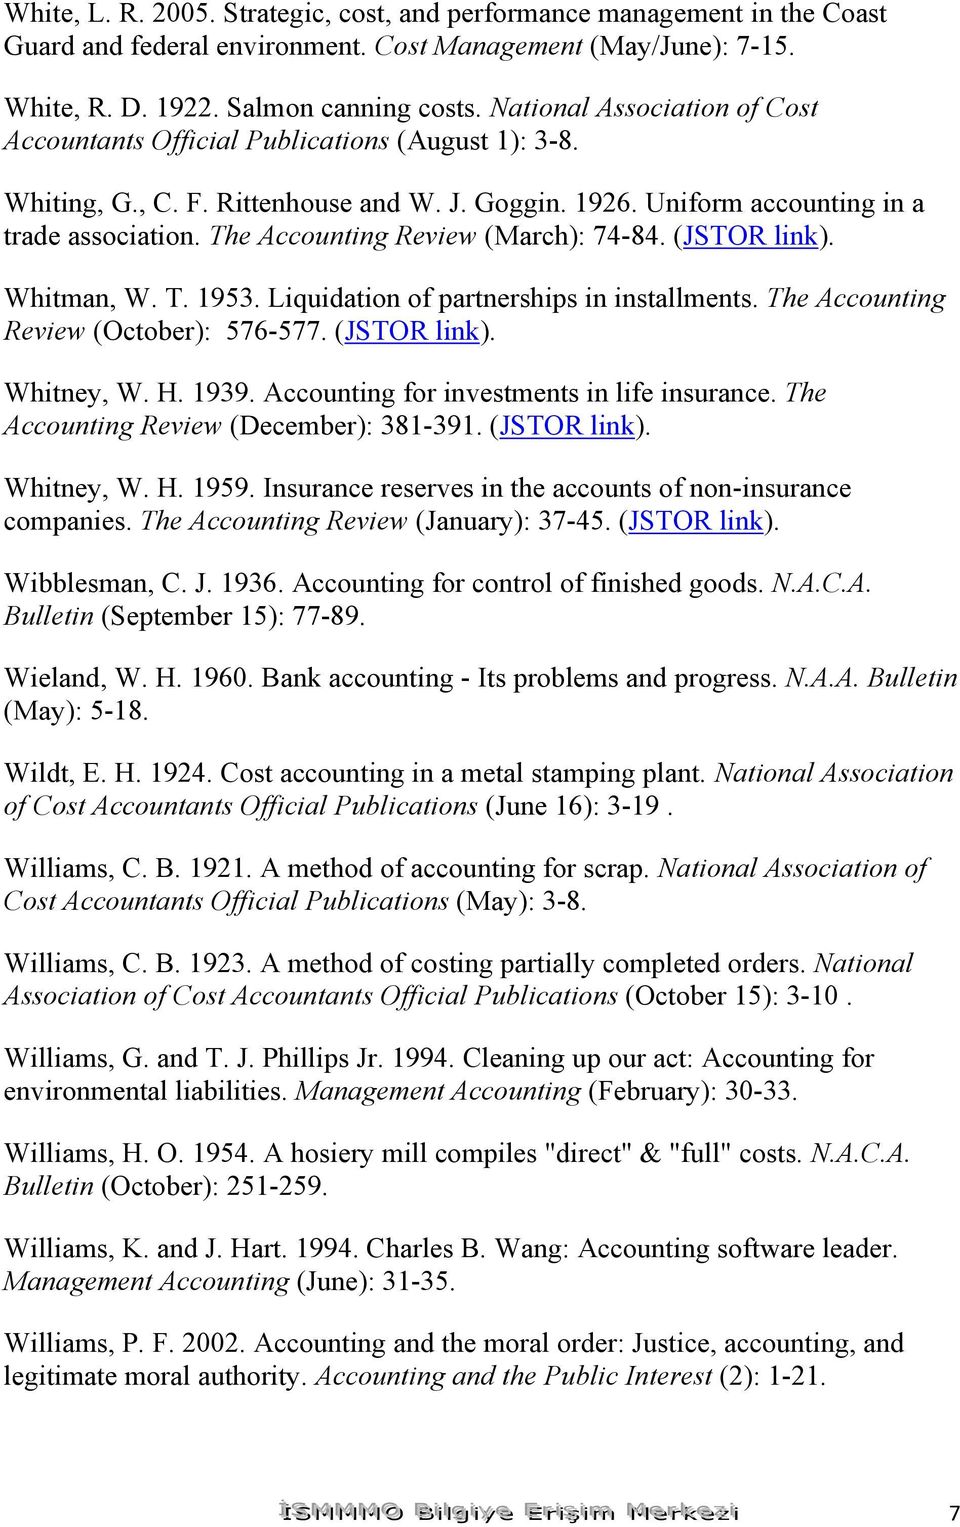 The Accounting Review (March): 74-84. (JSTOR link). Whitman, W. T. 1953. Liquidation of partnerships in installments. The Accounting Review (October): 576-577. (JSTOR link). Whitney, W. H. 1939.